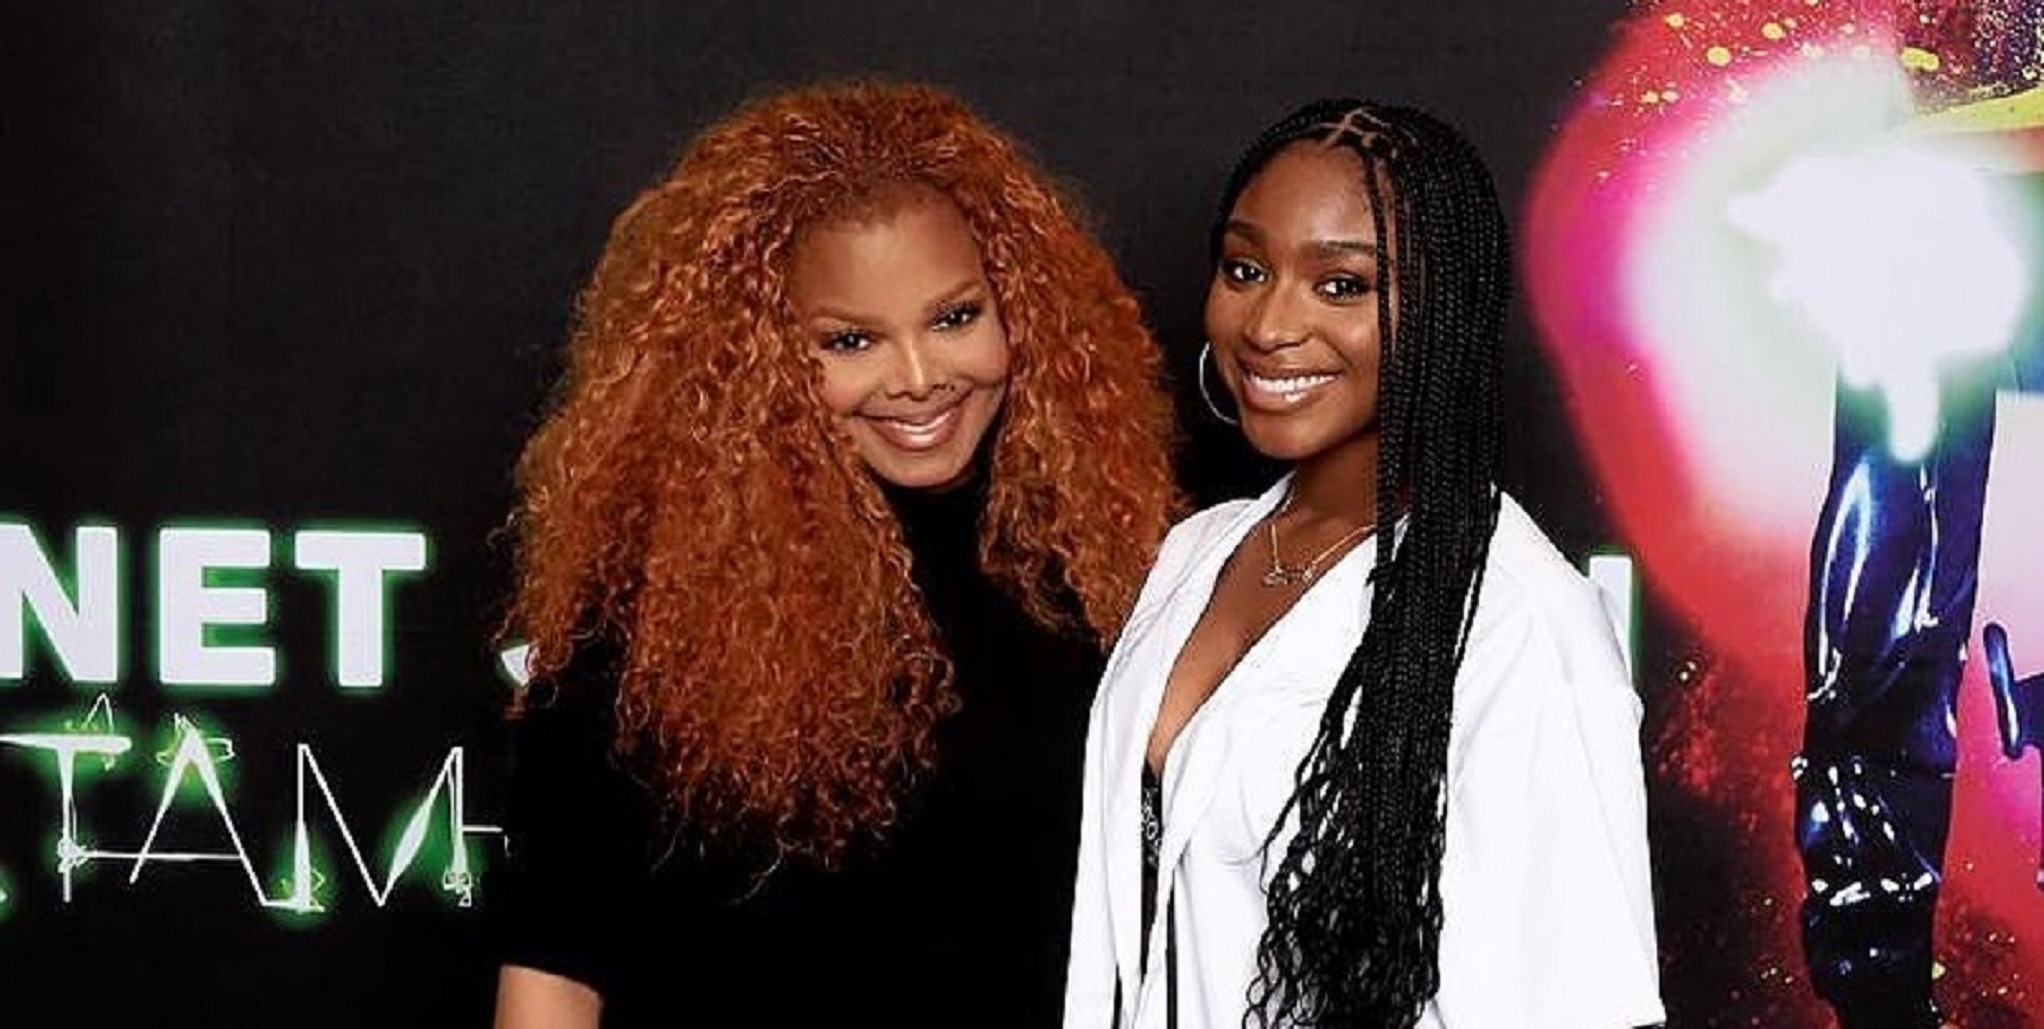 Janet Jackson to Normani: “I’m proud of U and I’m here for U”